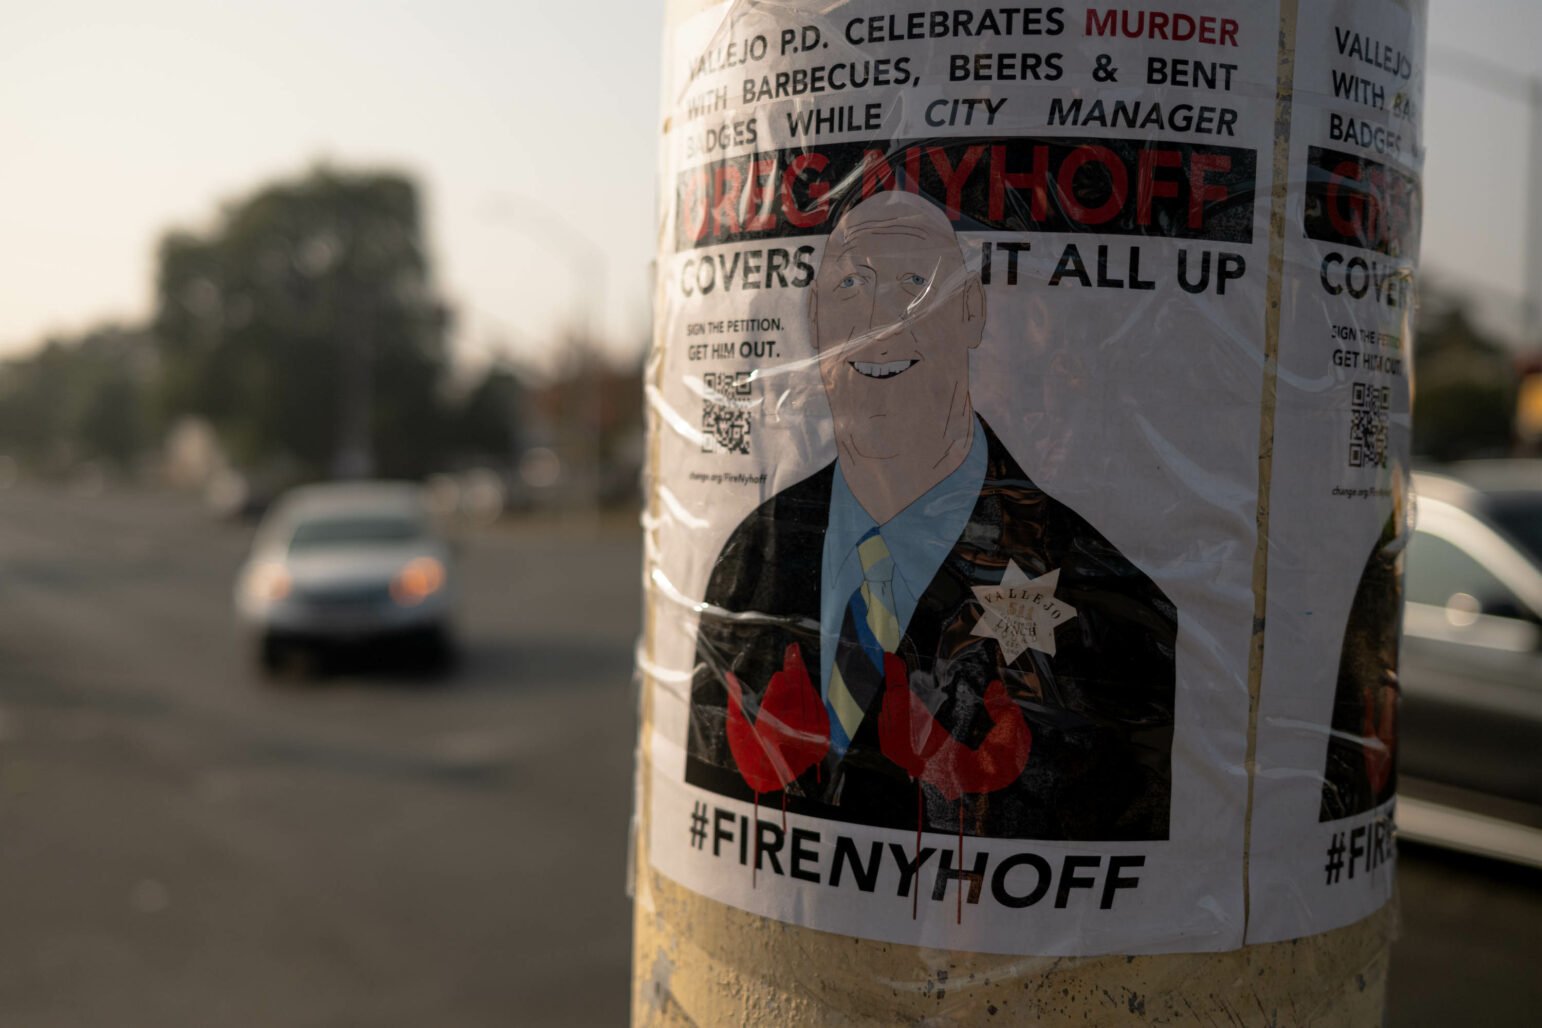 A poster on a utility pole, with a cartoon illustration of a man in a suit, overlaid with text and hashtags calling for his removal from office. There is a QR code at the bottom, and the background shows a blurred street scene.